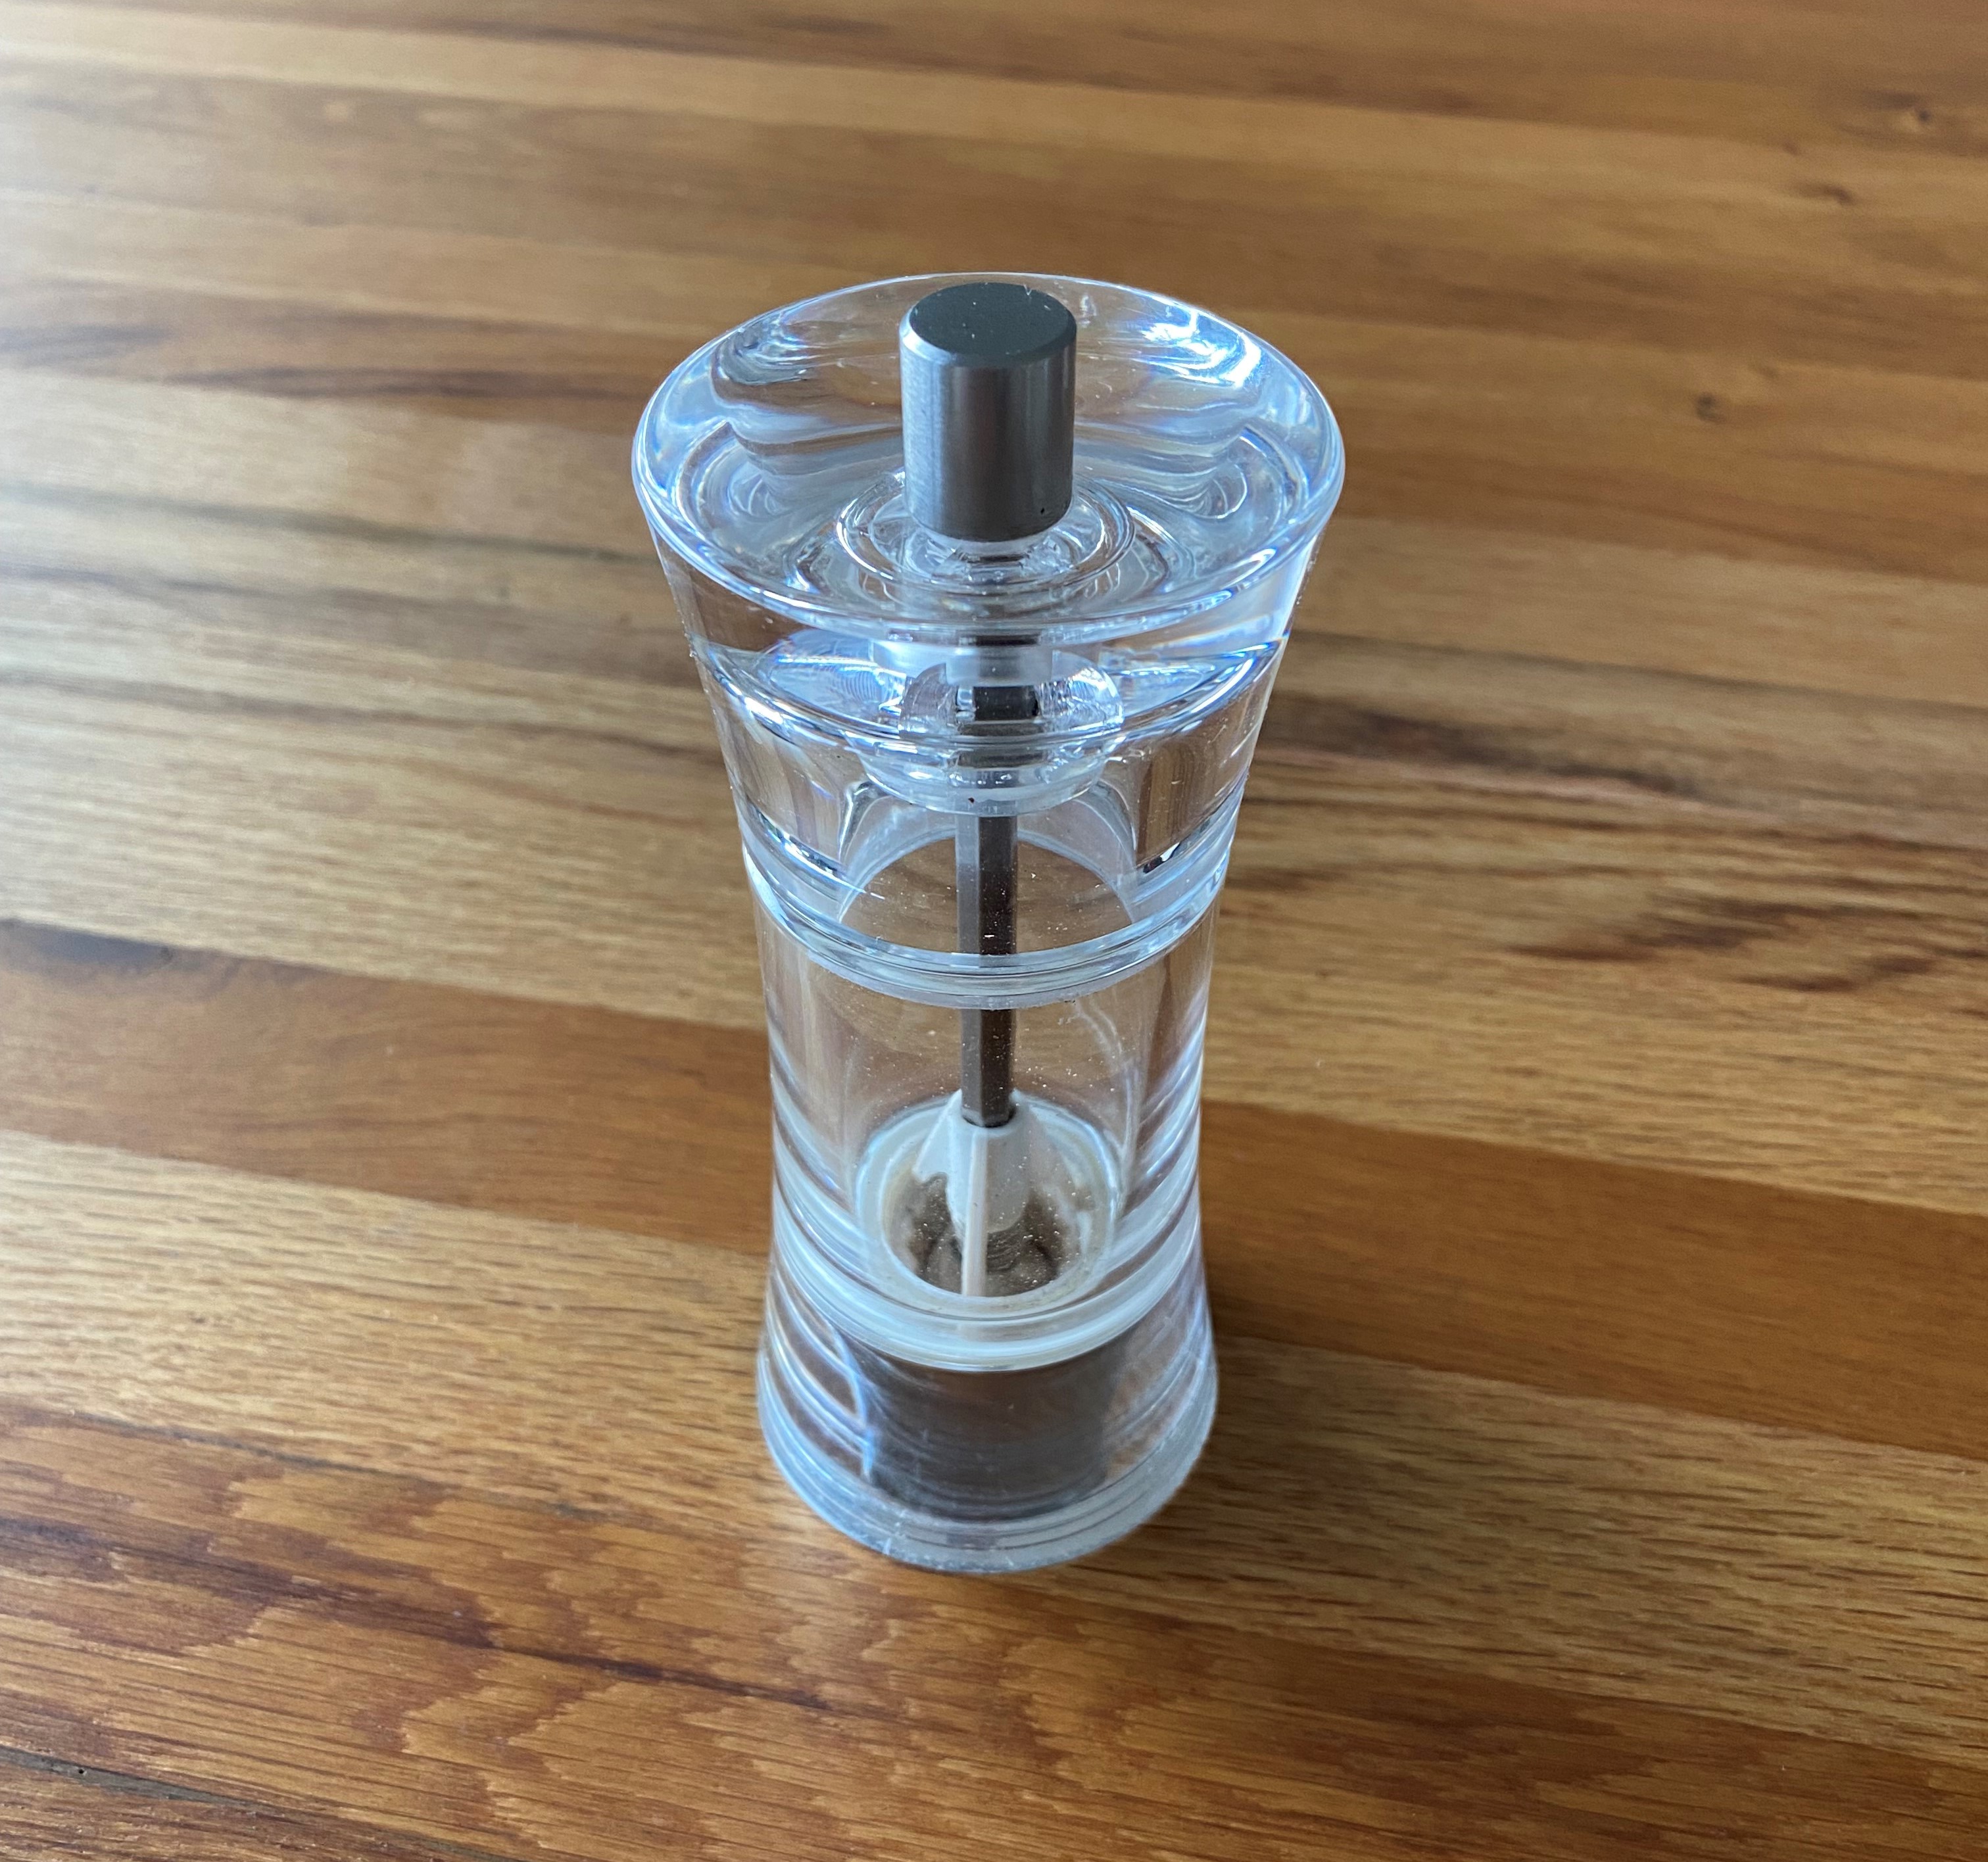 Pepper-Grinder Spring-Ring replacement fits for Zassenhaus